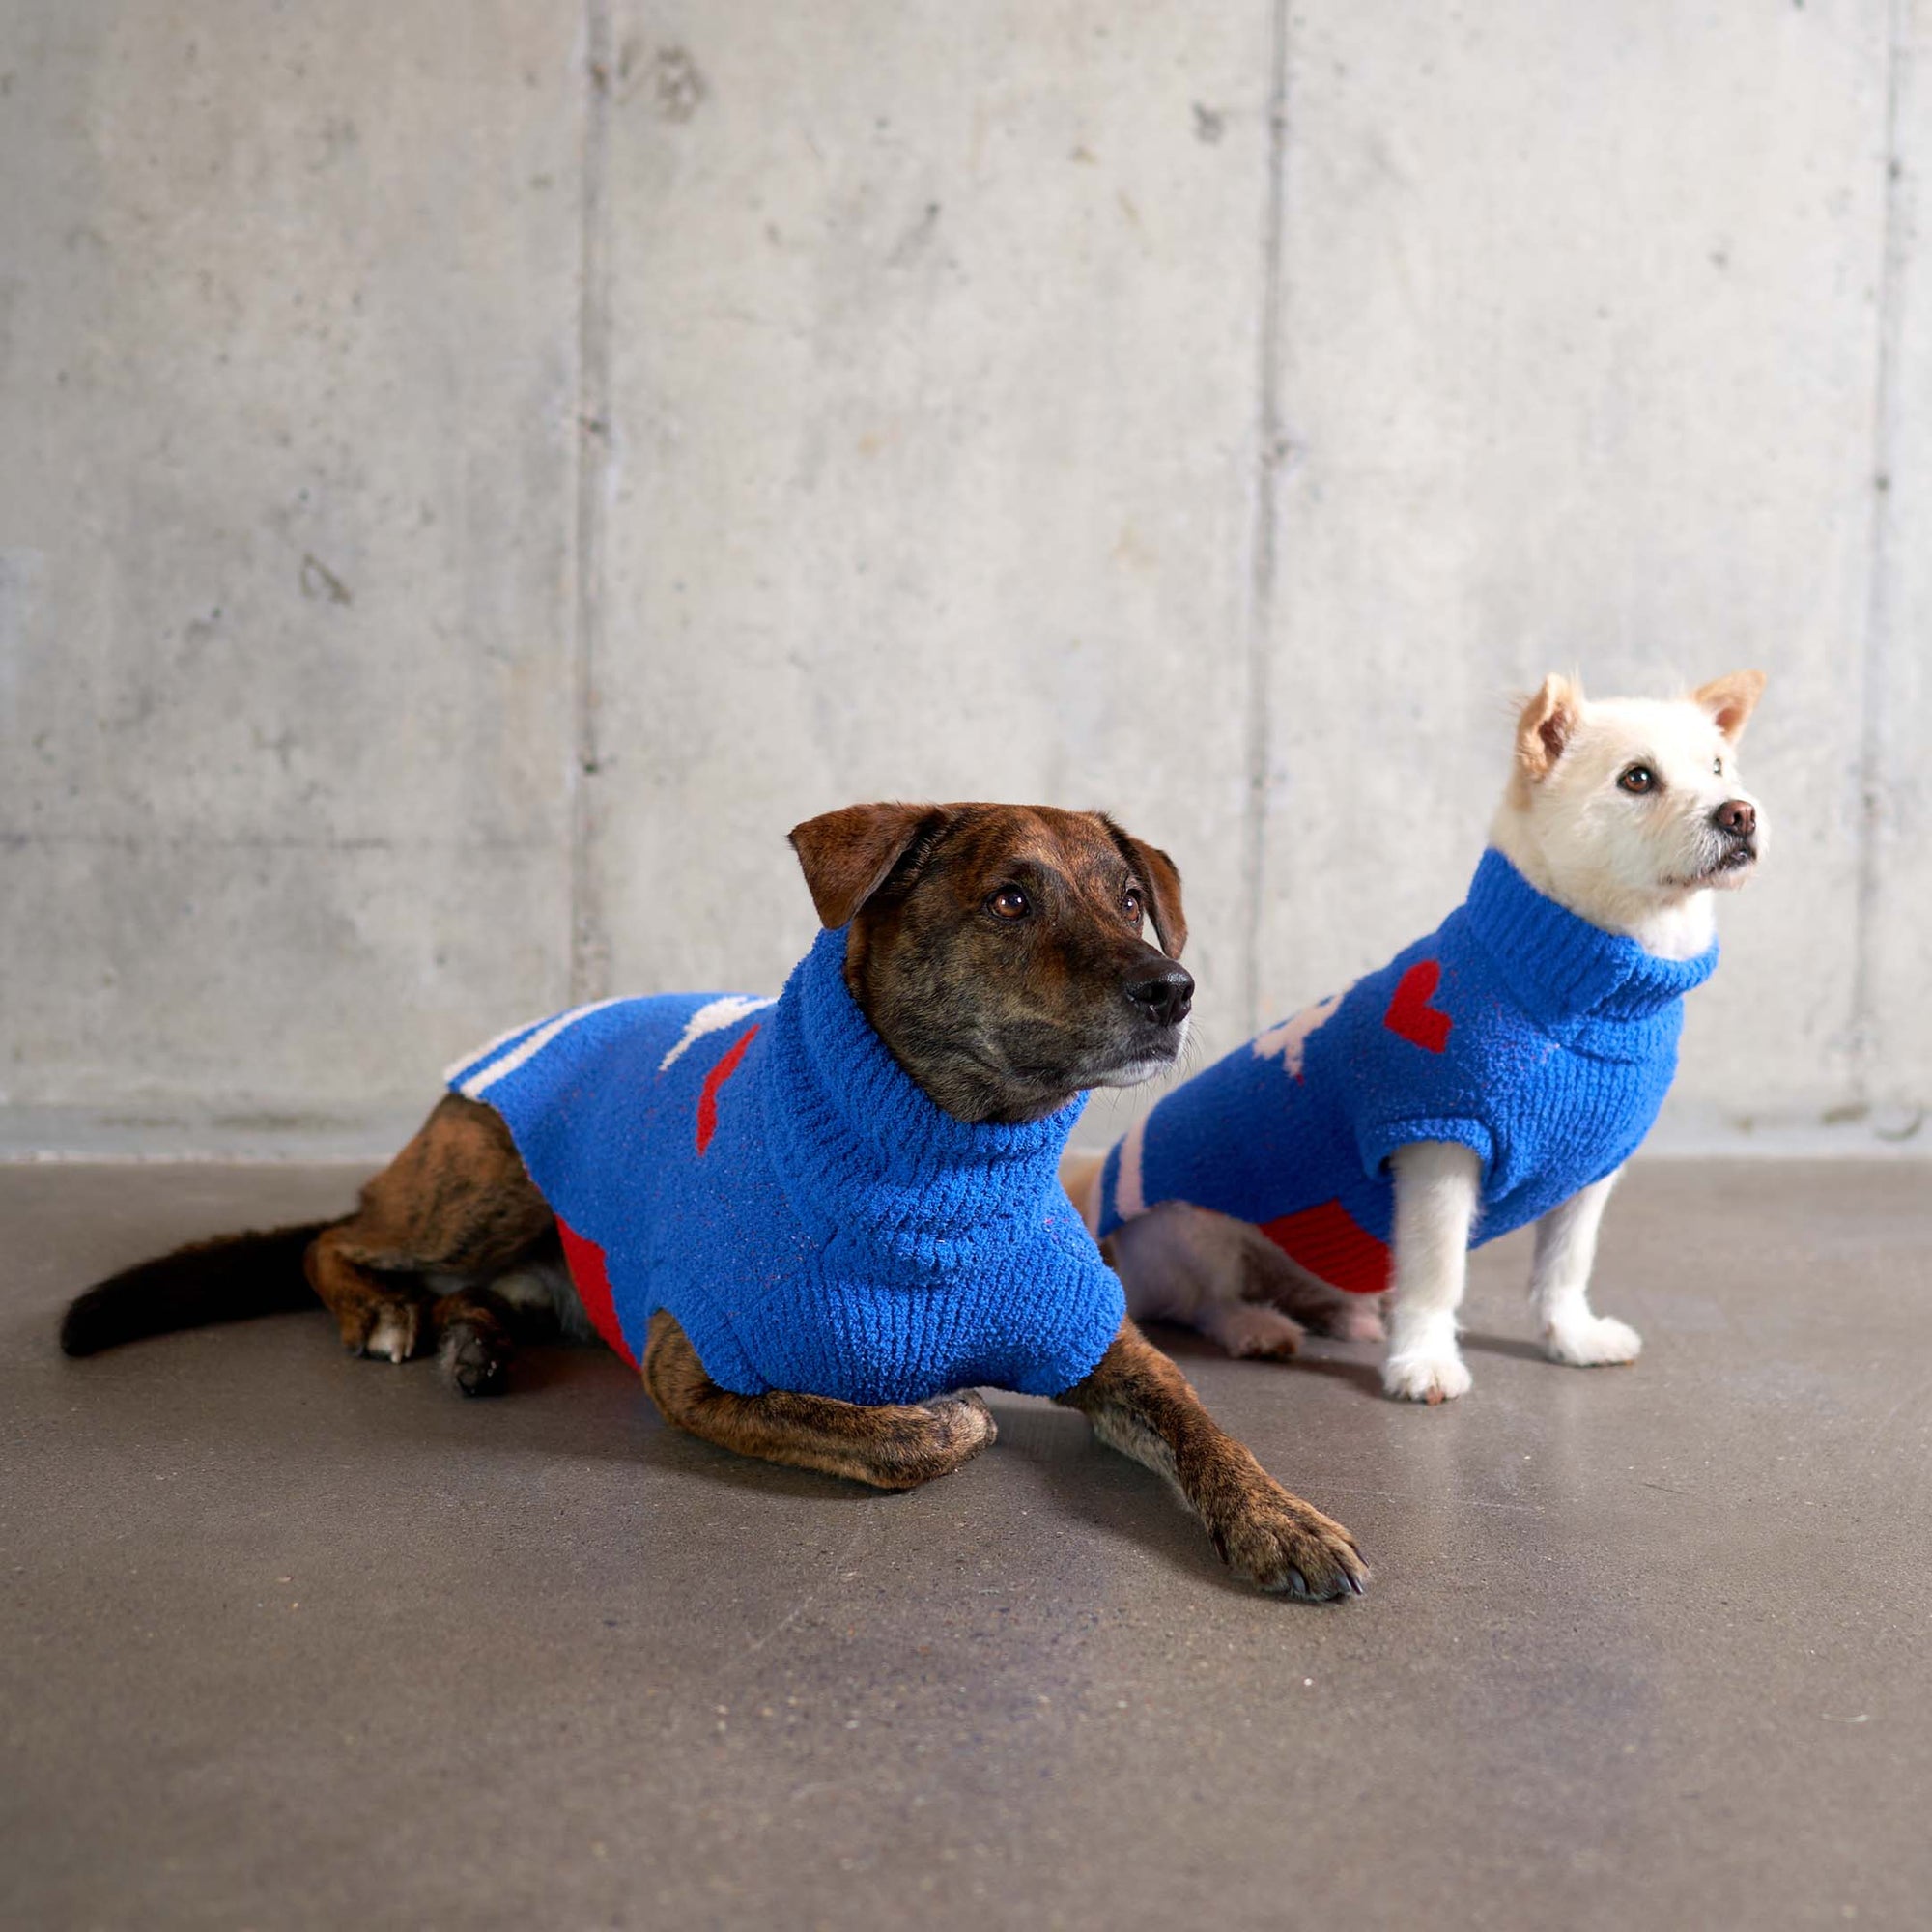 Two dogs in blue "The Furryfolks" sweaters with red hearts, lying down on a concrete floor.